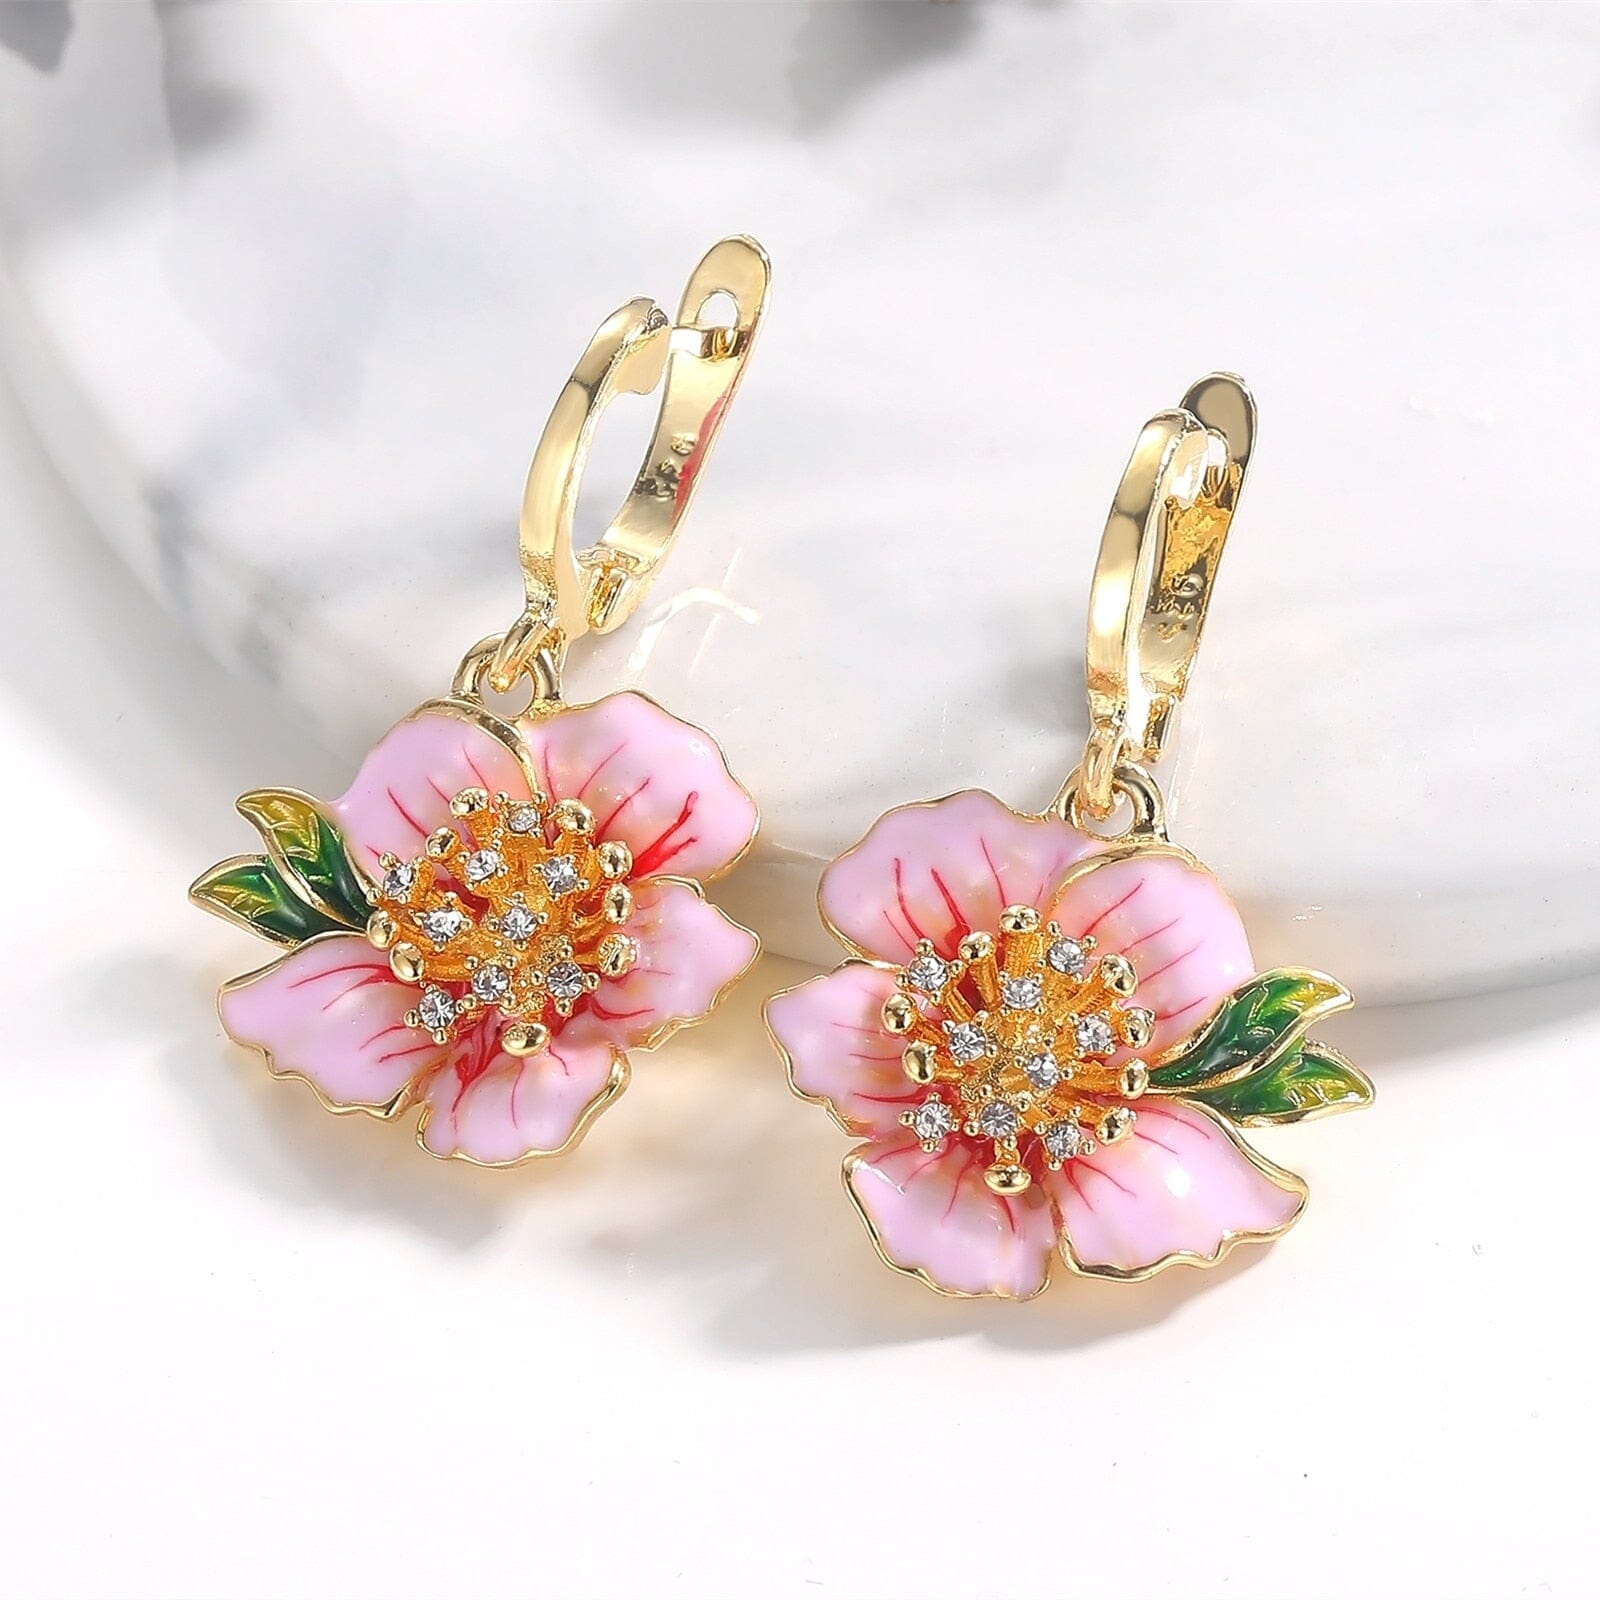 Exquisite Lady Yellow Gold Color Peach Blossom Flower Drop Earrings